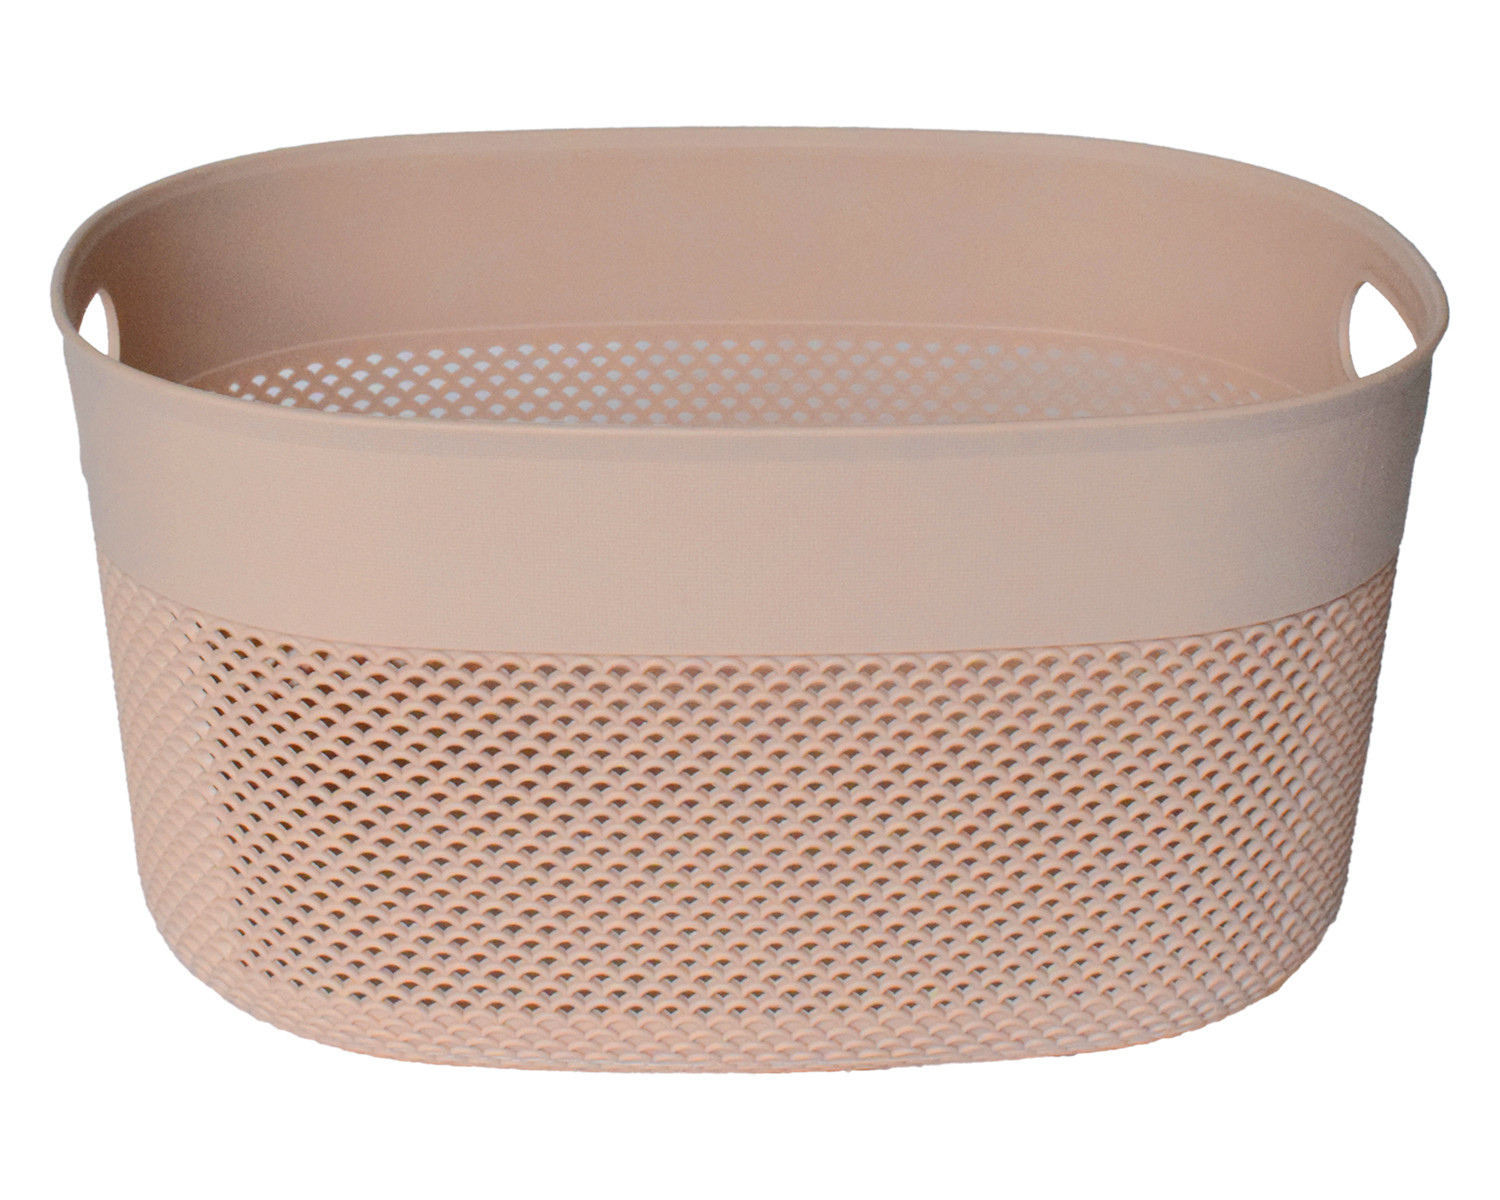 Kuber Industries Unbreakable Large Multipurpose Storage Baskets with lid|Design-Netted|Material-Plastic|Shape-Oval|Color-Beige